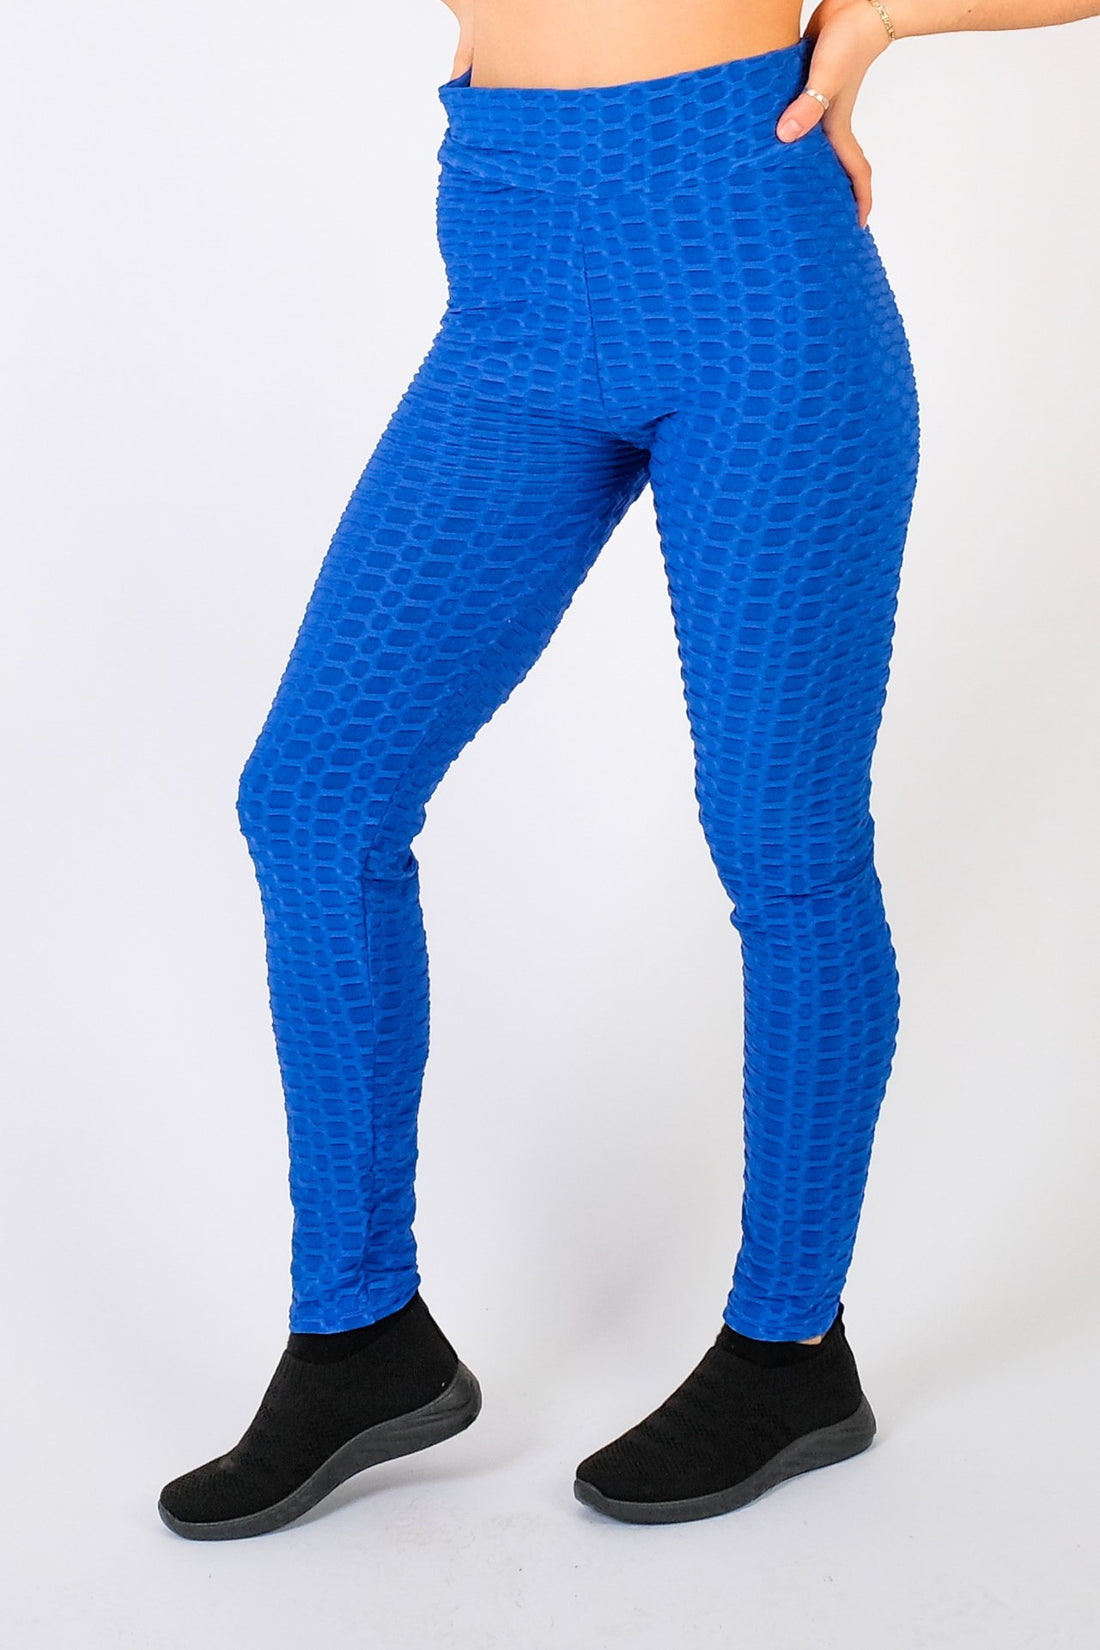 Honeycomb - Waffle Textured Active Wear Stretch Leggings - Pinstripe